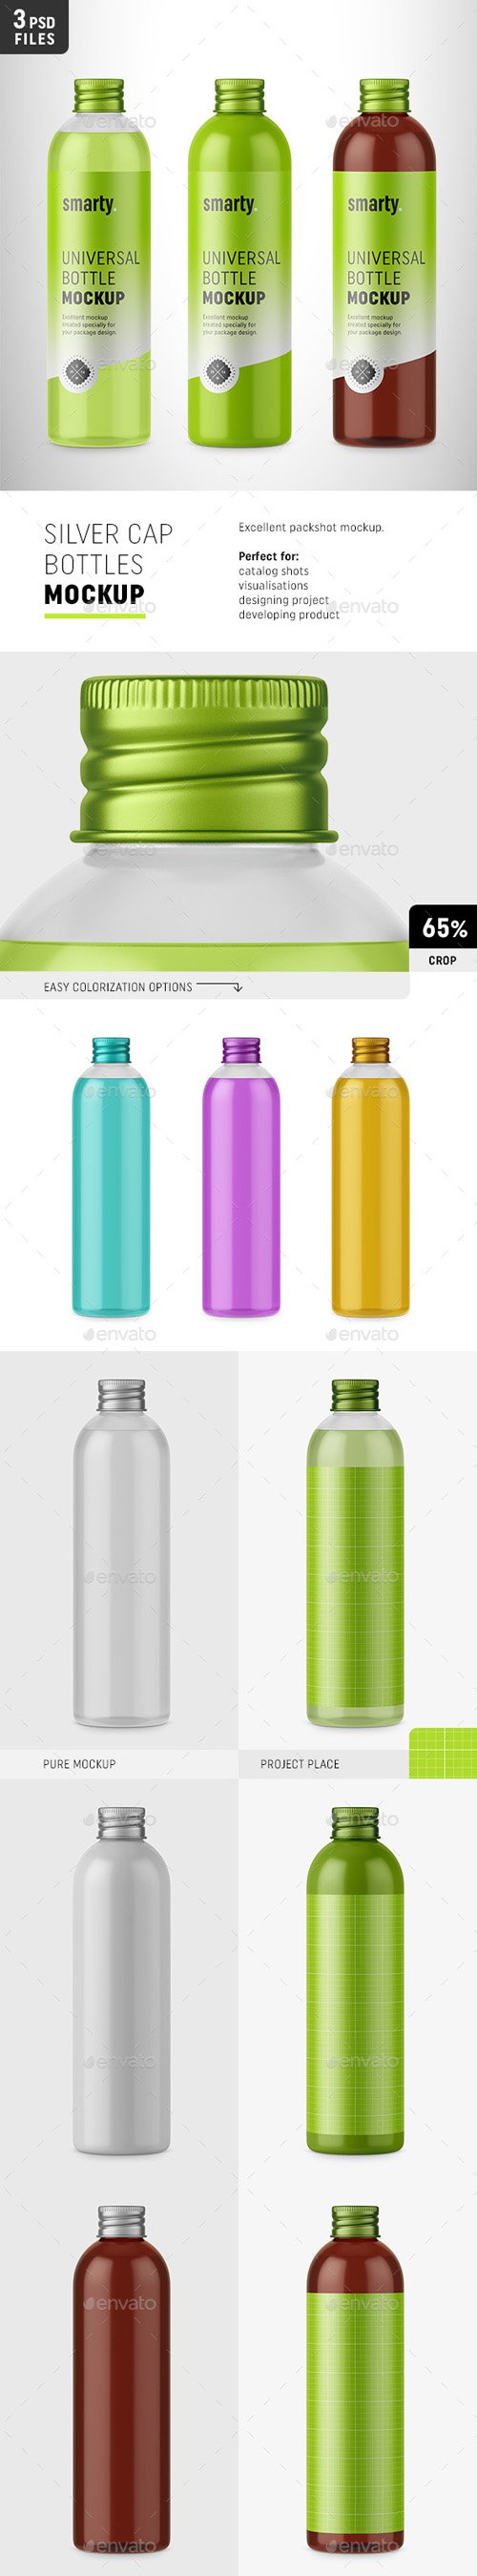 Bottles with Silver Cap Mockup 20234390